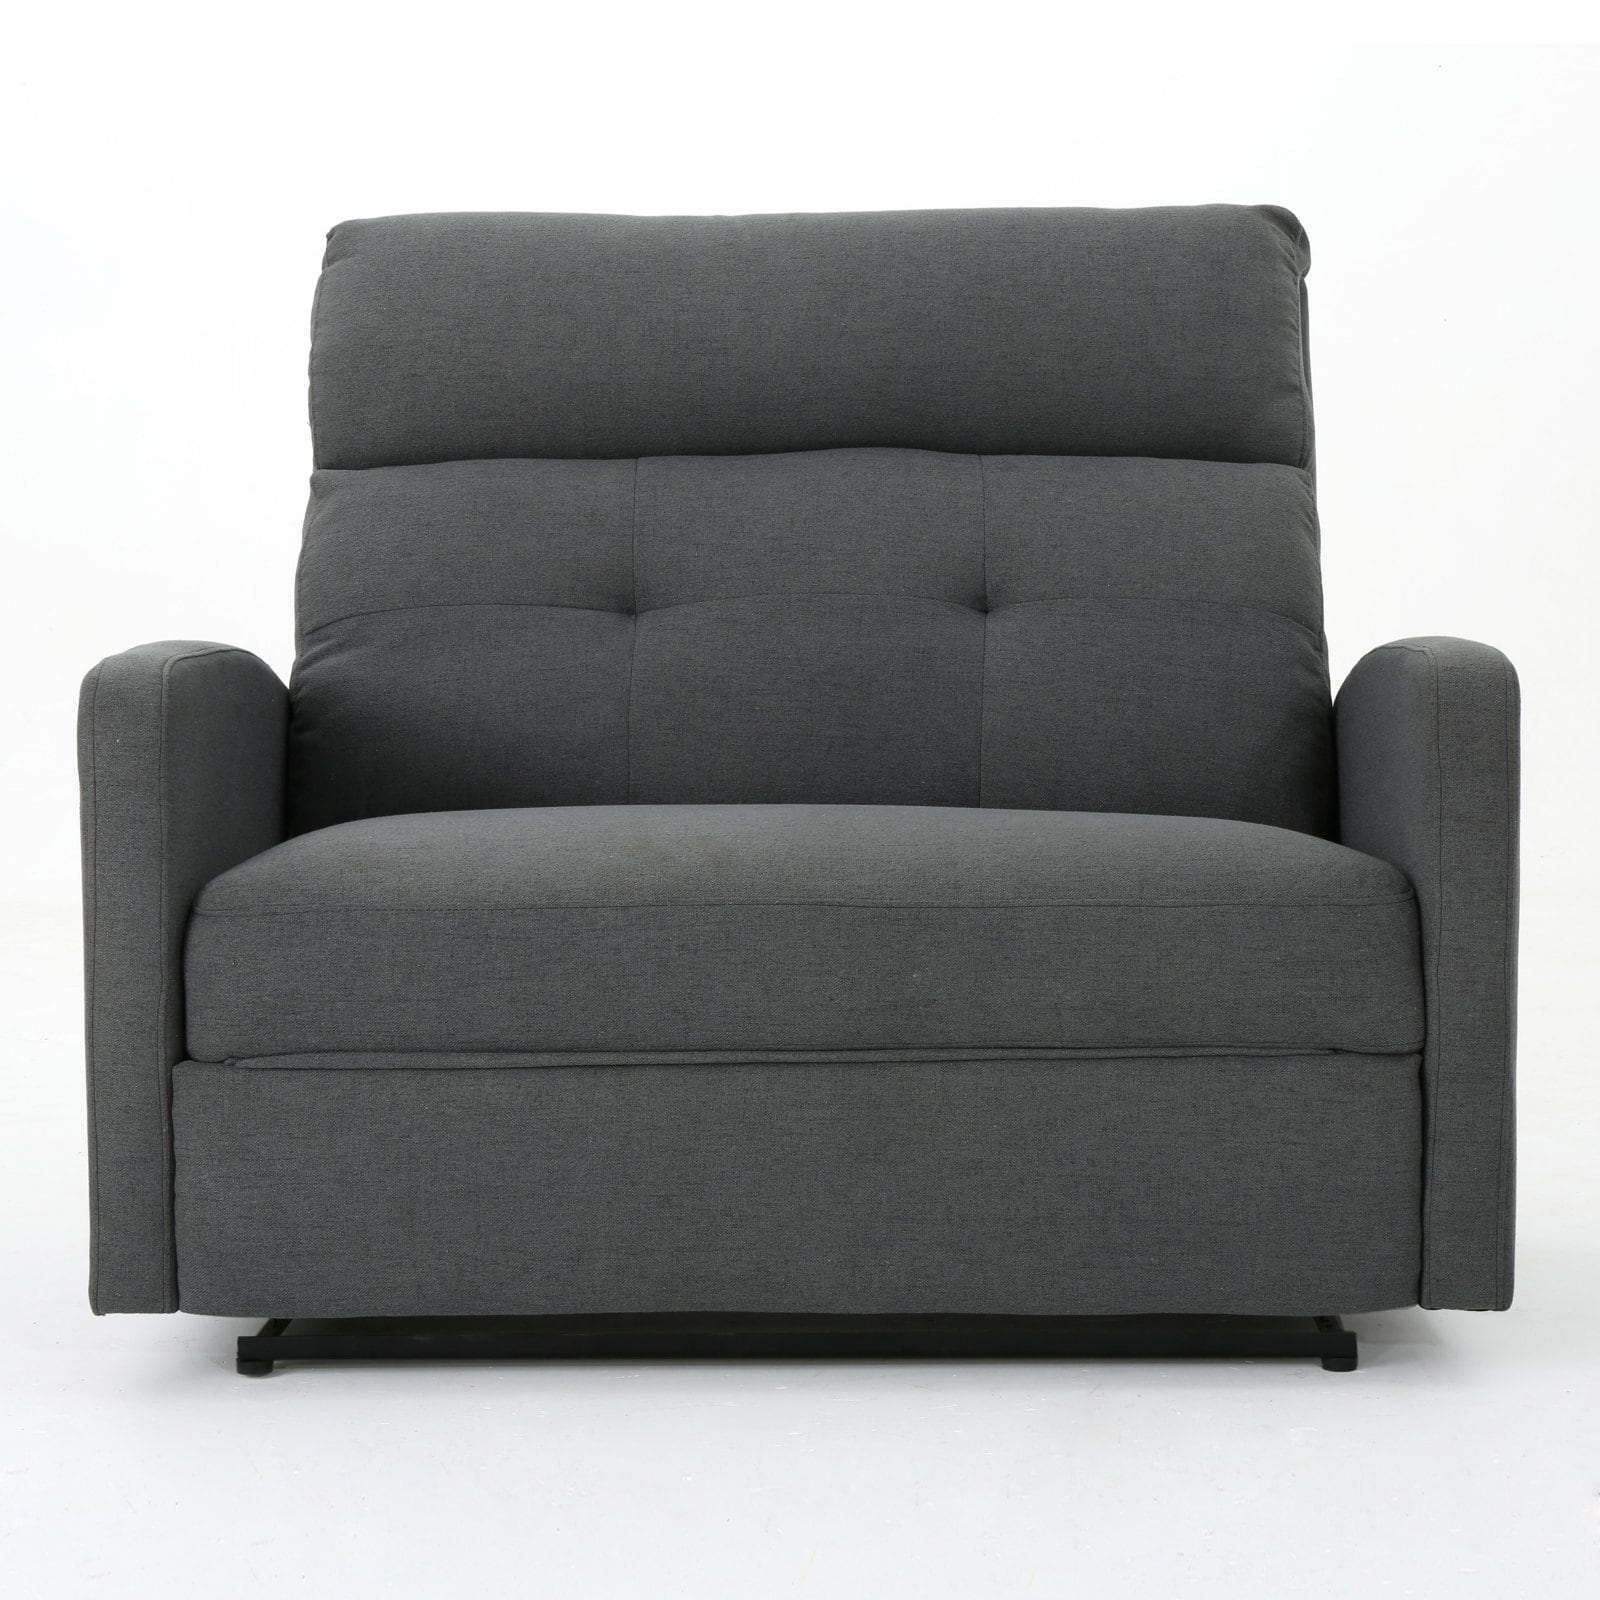 Halima Tufted 2 Seater Recliner - image 4 of 10